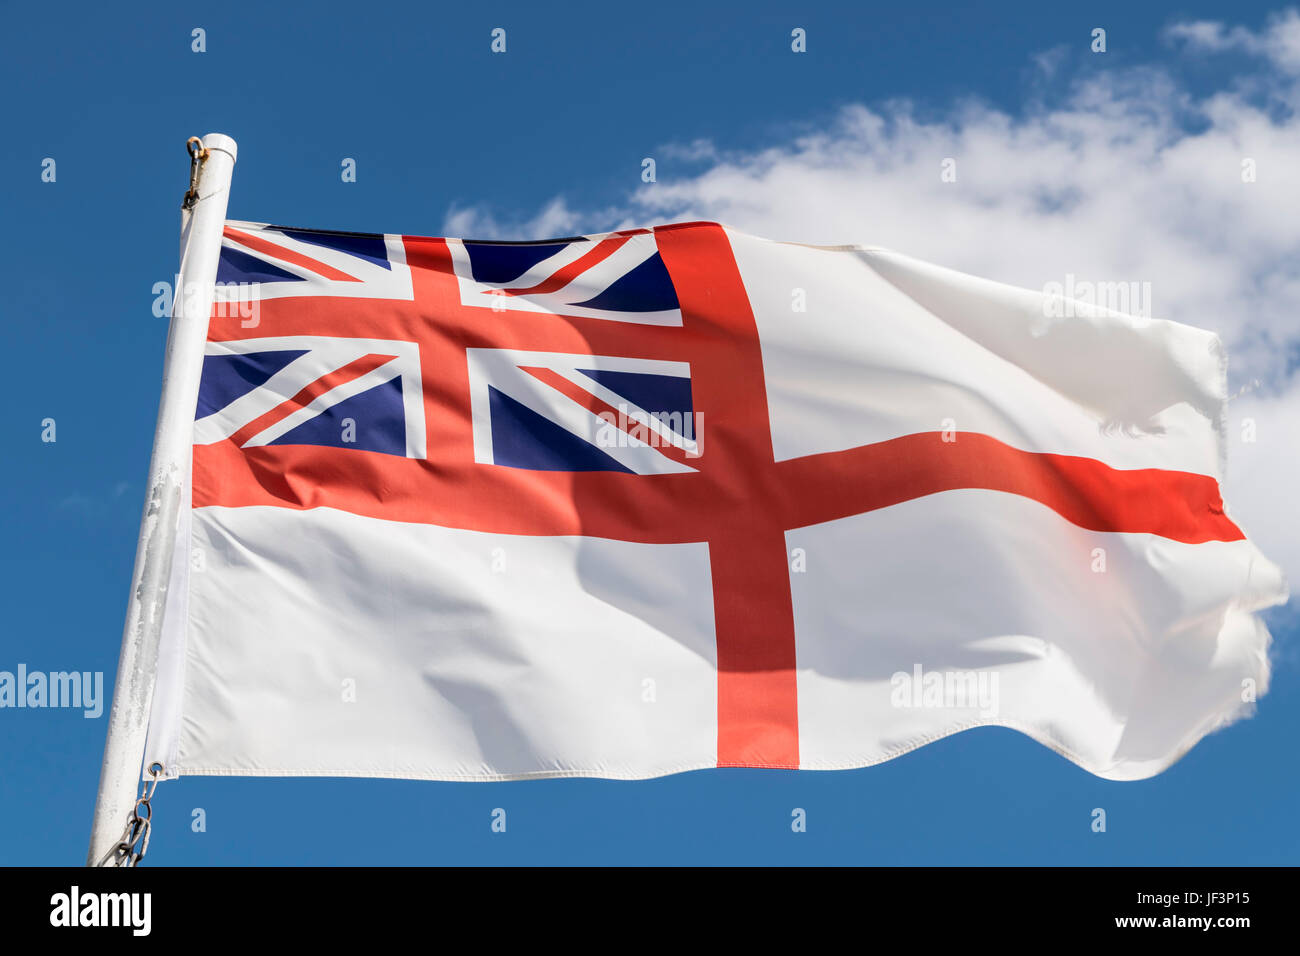 The White Ensign Standard of the Royal Navy Stock Photo